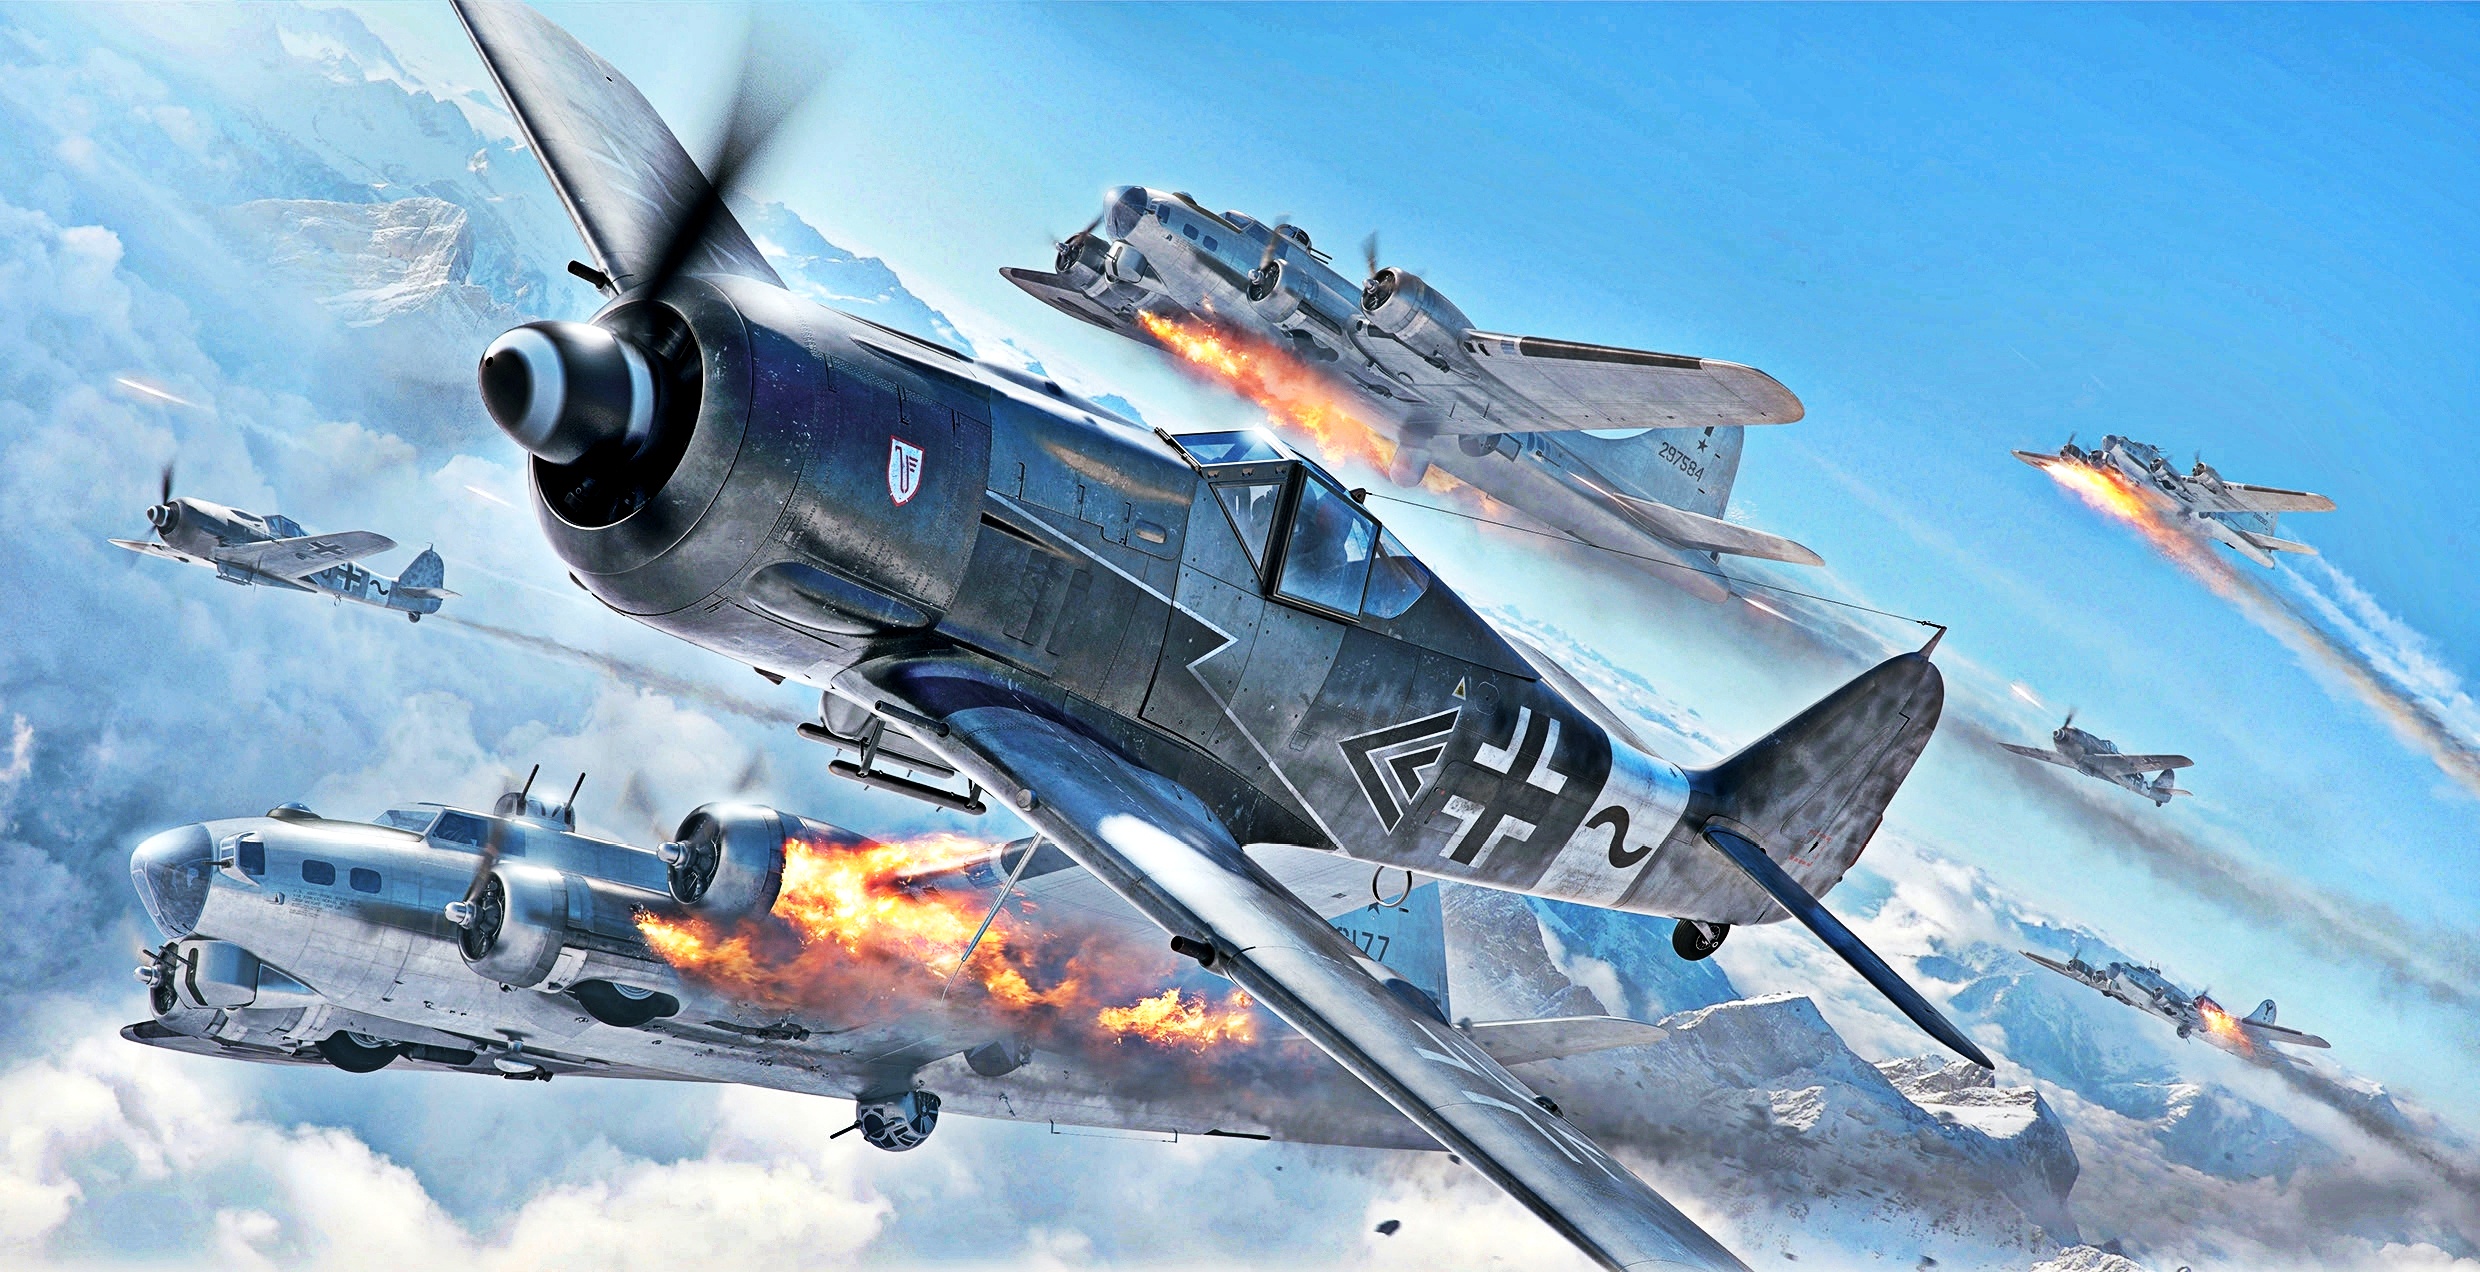 General 2480x1272 artwork aircraft military aircraft war military Focke-Wulf Fw 190 Boeing B-17 Flying Fortress American aircraft smoke clouds German aircraft dogfight fire flying